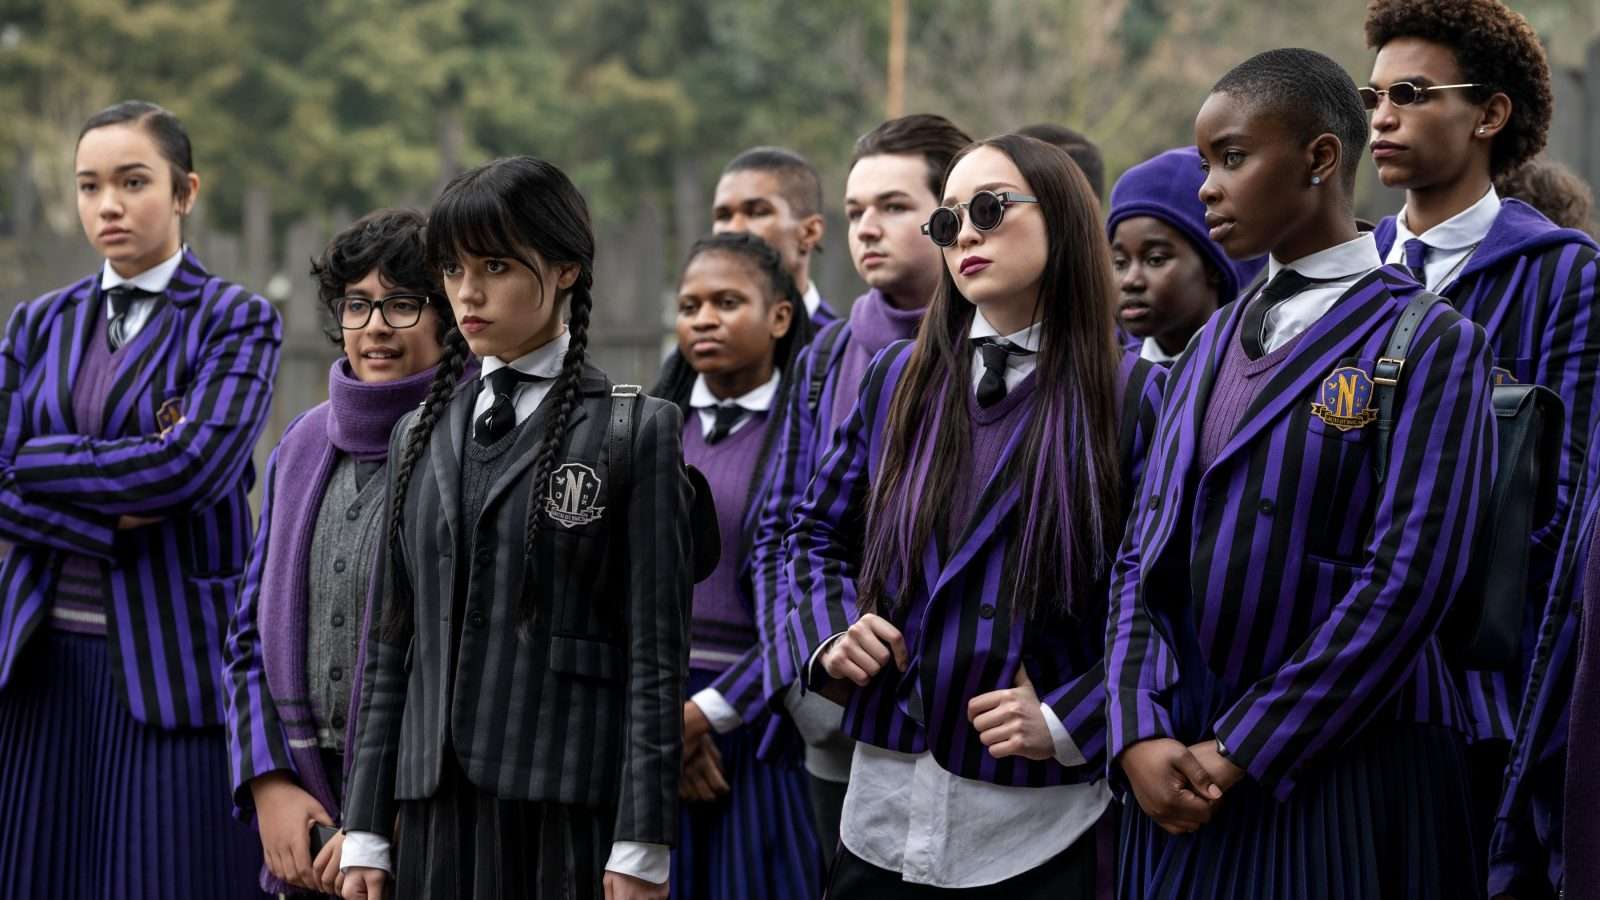 The pupils of Nevermore in Wednesday.